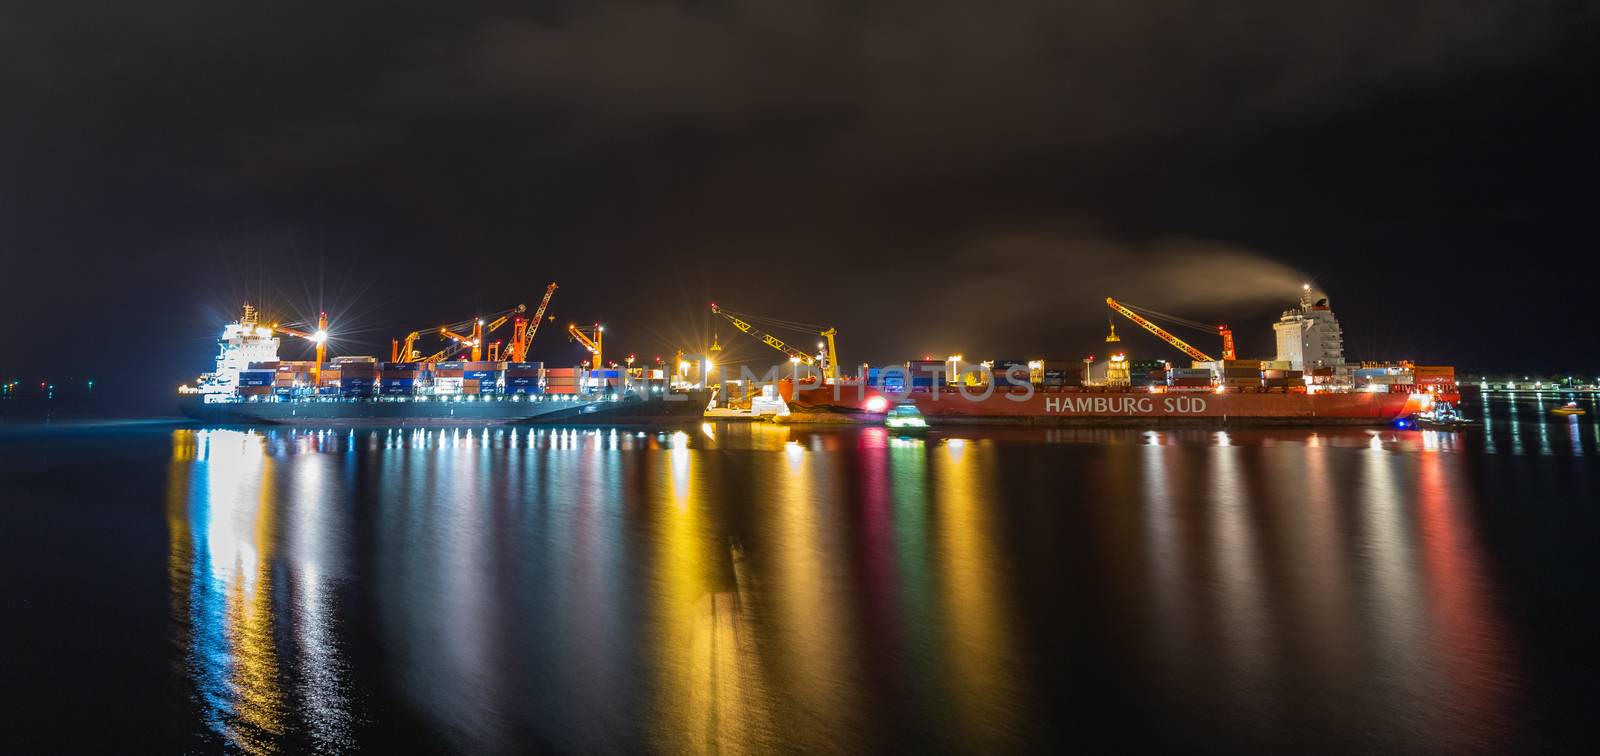 Port with loading cranes and cargo ships by DamantisZ